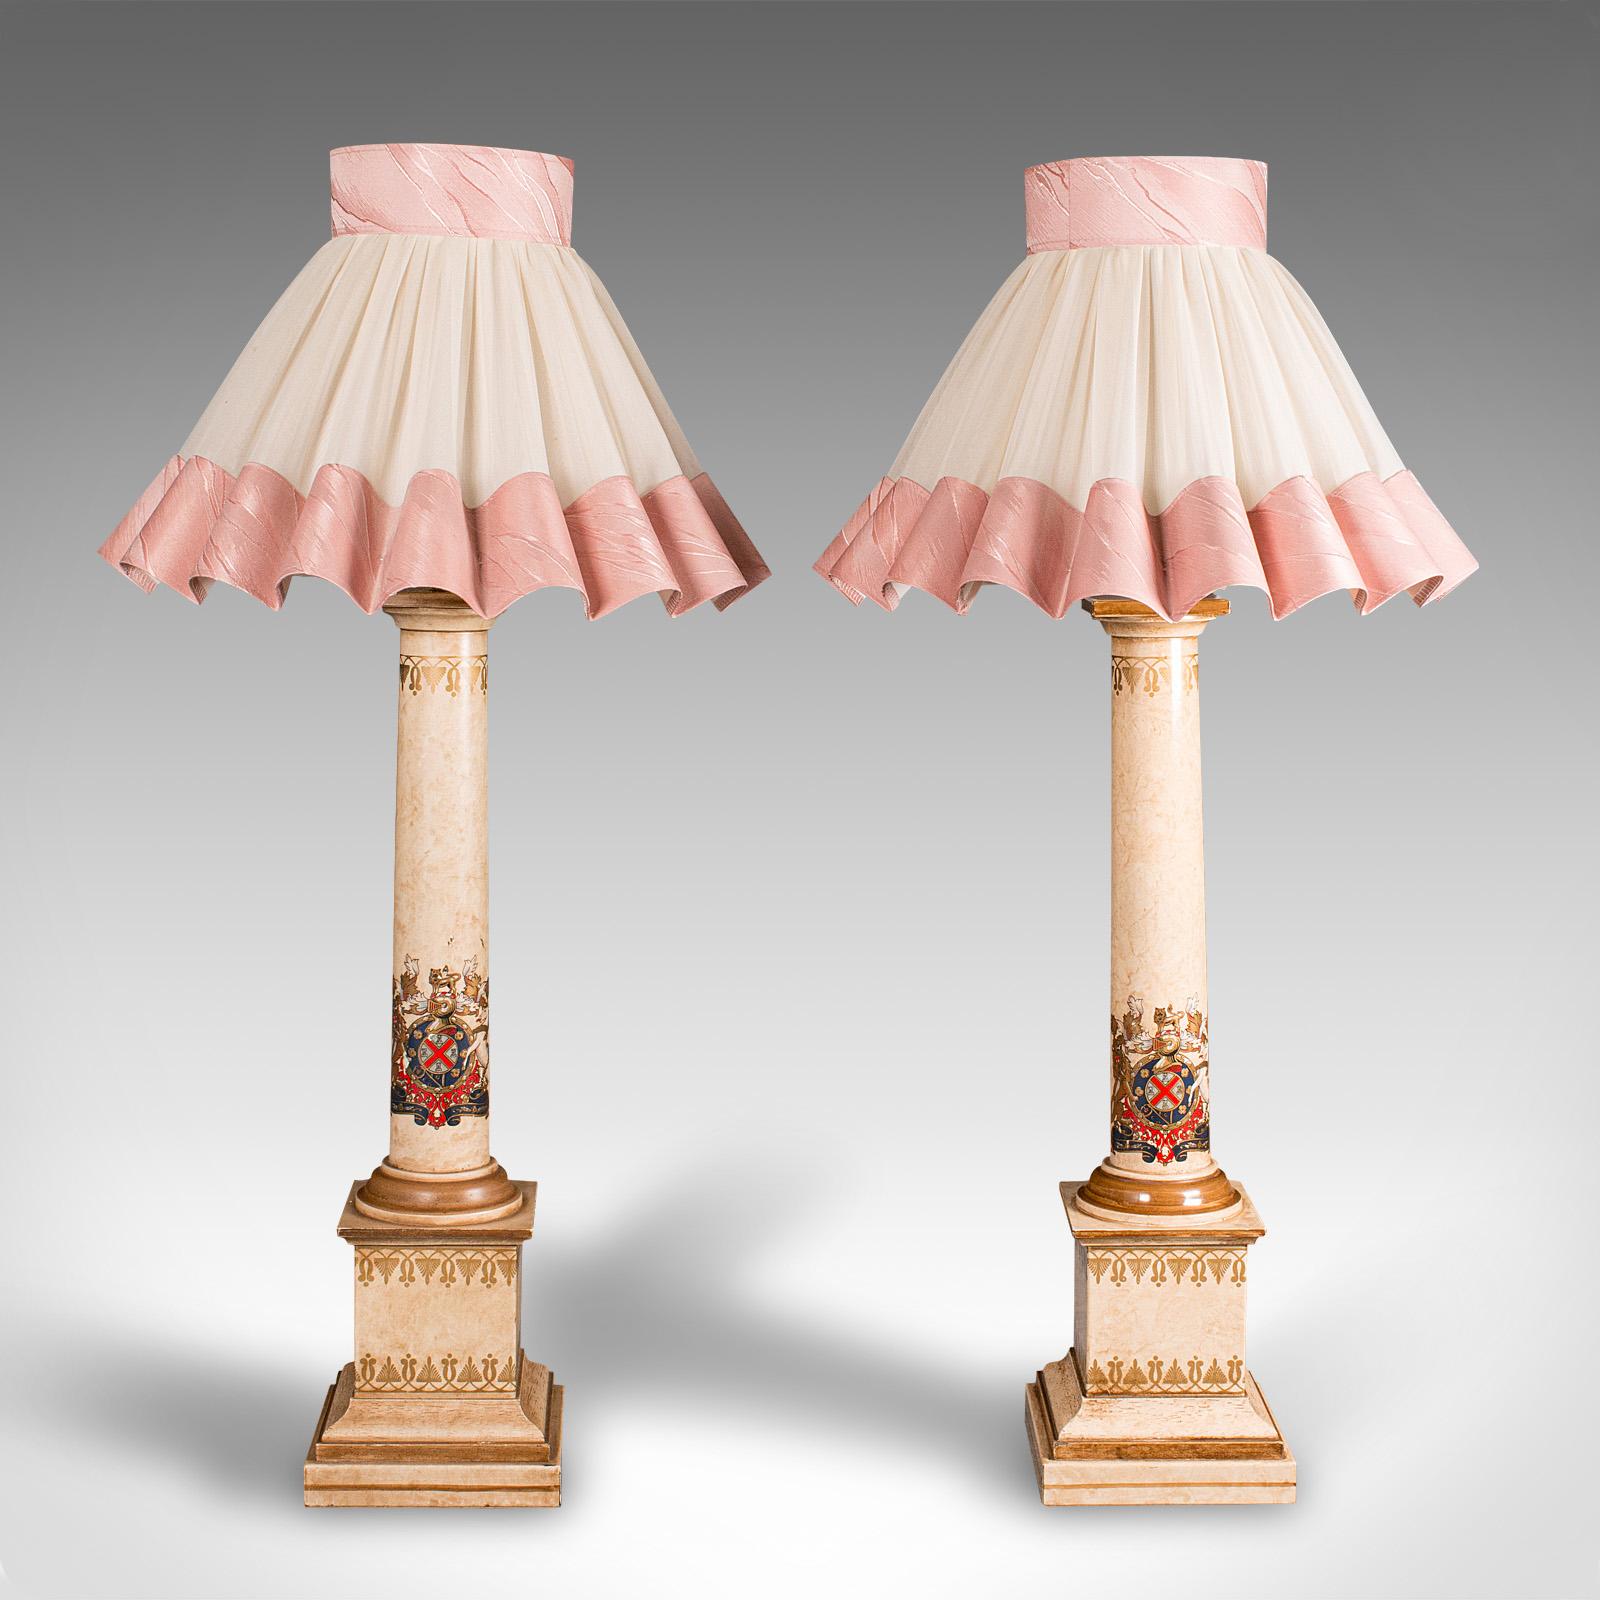 Mid-Century Modern Tall Pair Of Vintage Table Lamps, English, Decorative Light, Mid Century, C.1960 For Sale